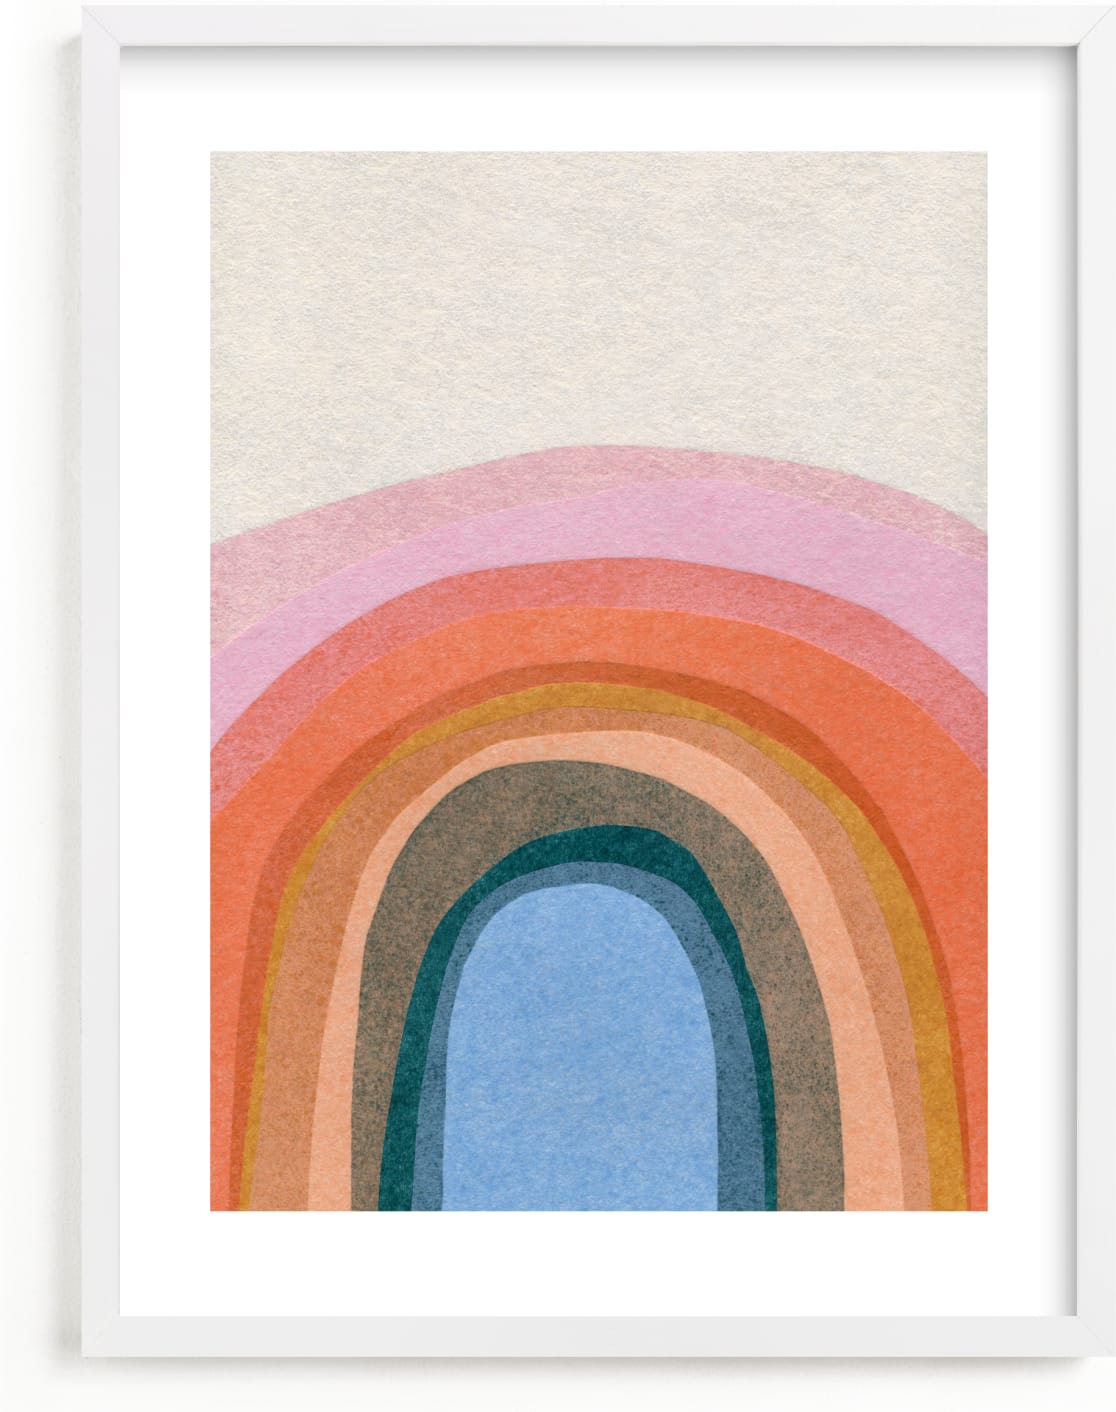 This is a blue nursery wall art by Carrie Moradi called Rainbow Hill.